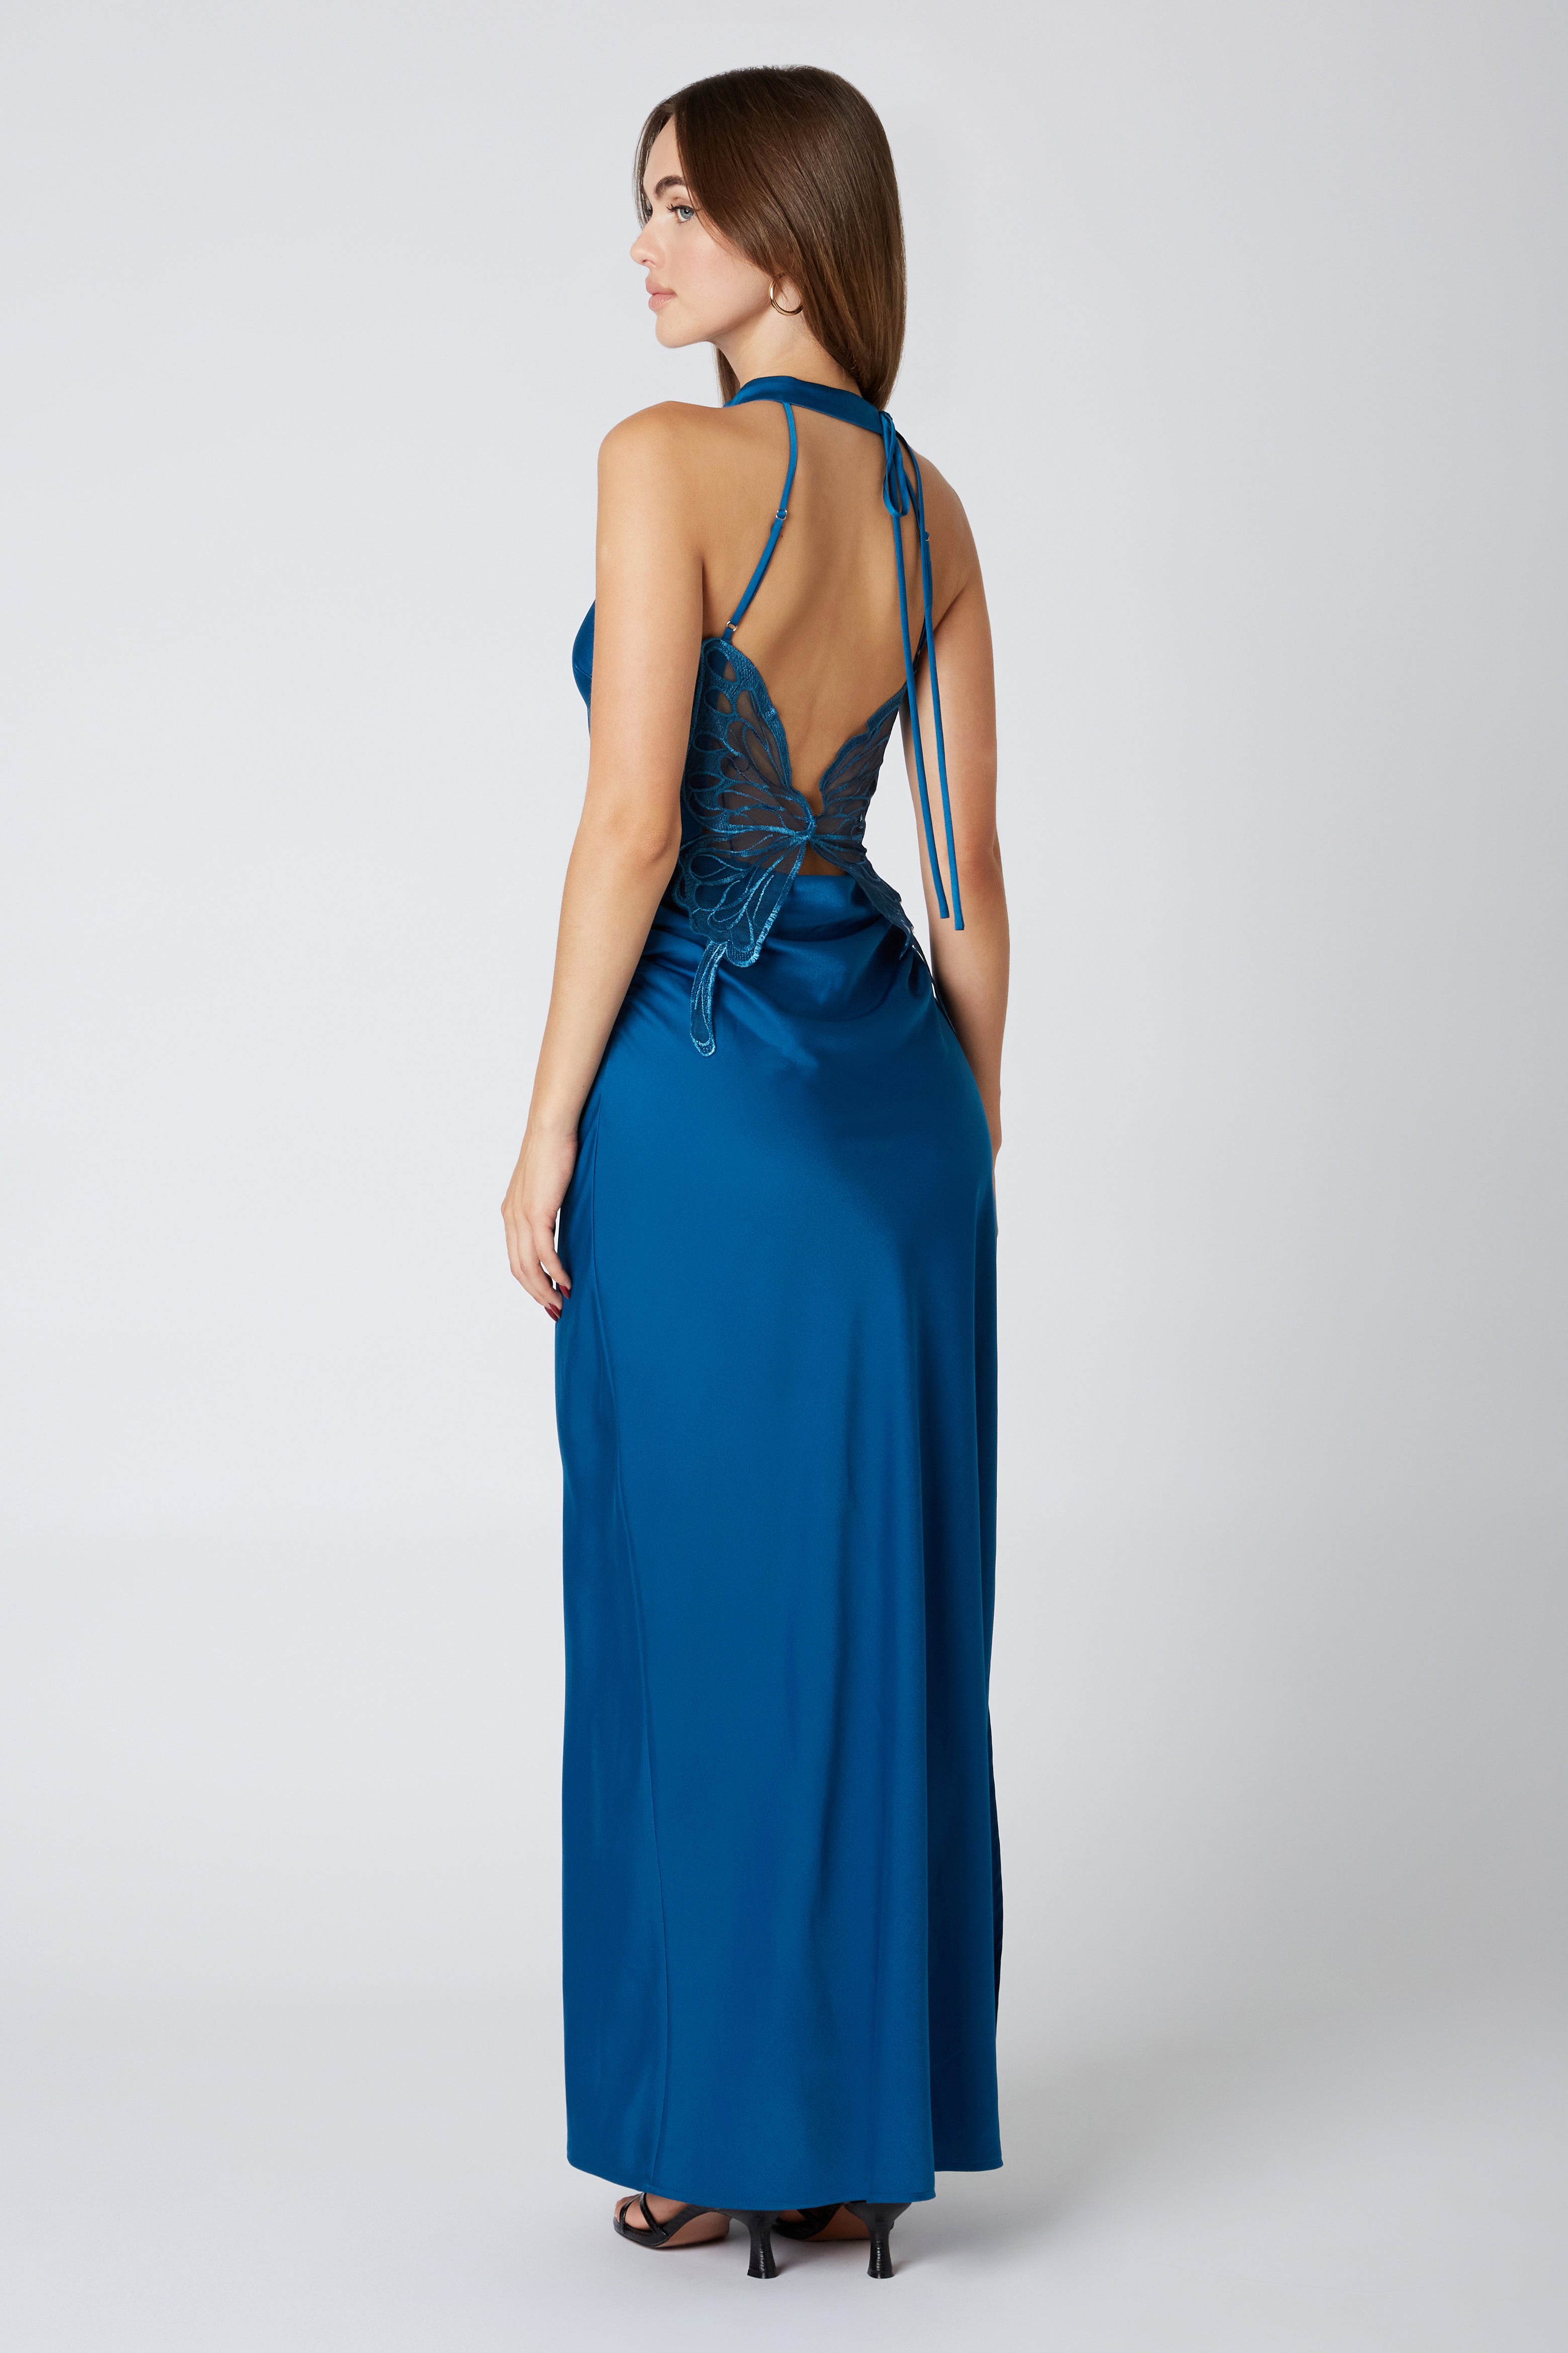 Runway Butterfly Maxi Dress in Teal Blue Back View